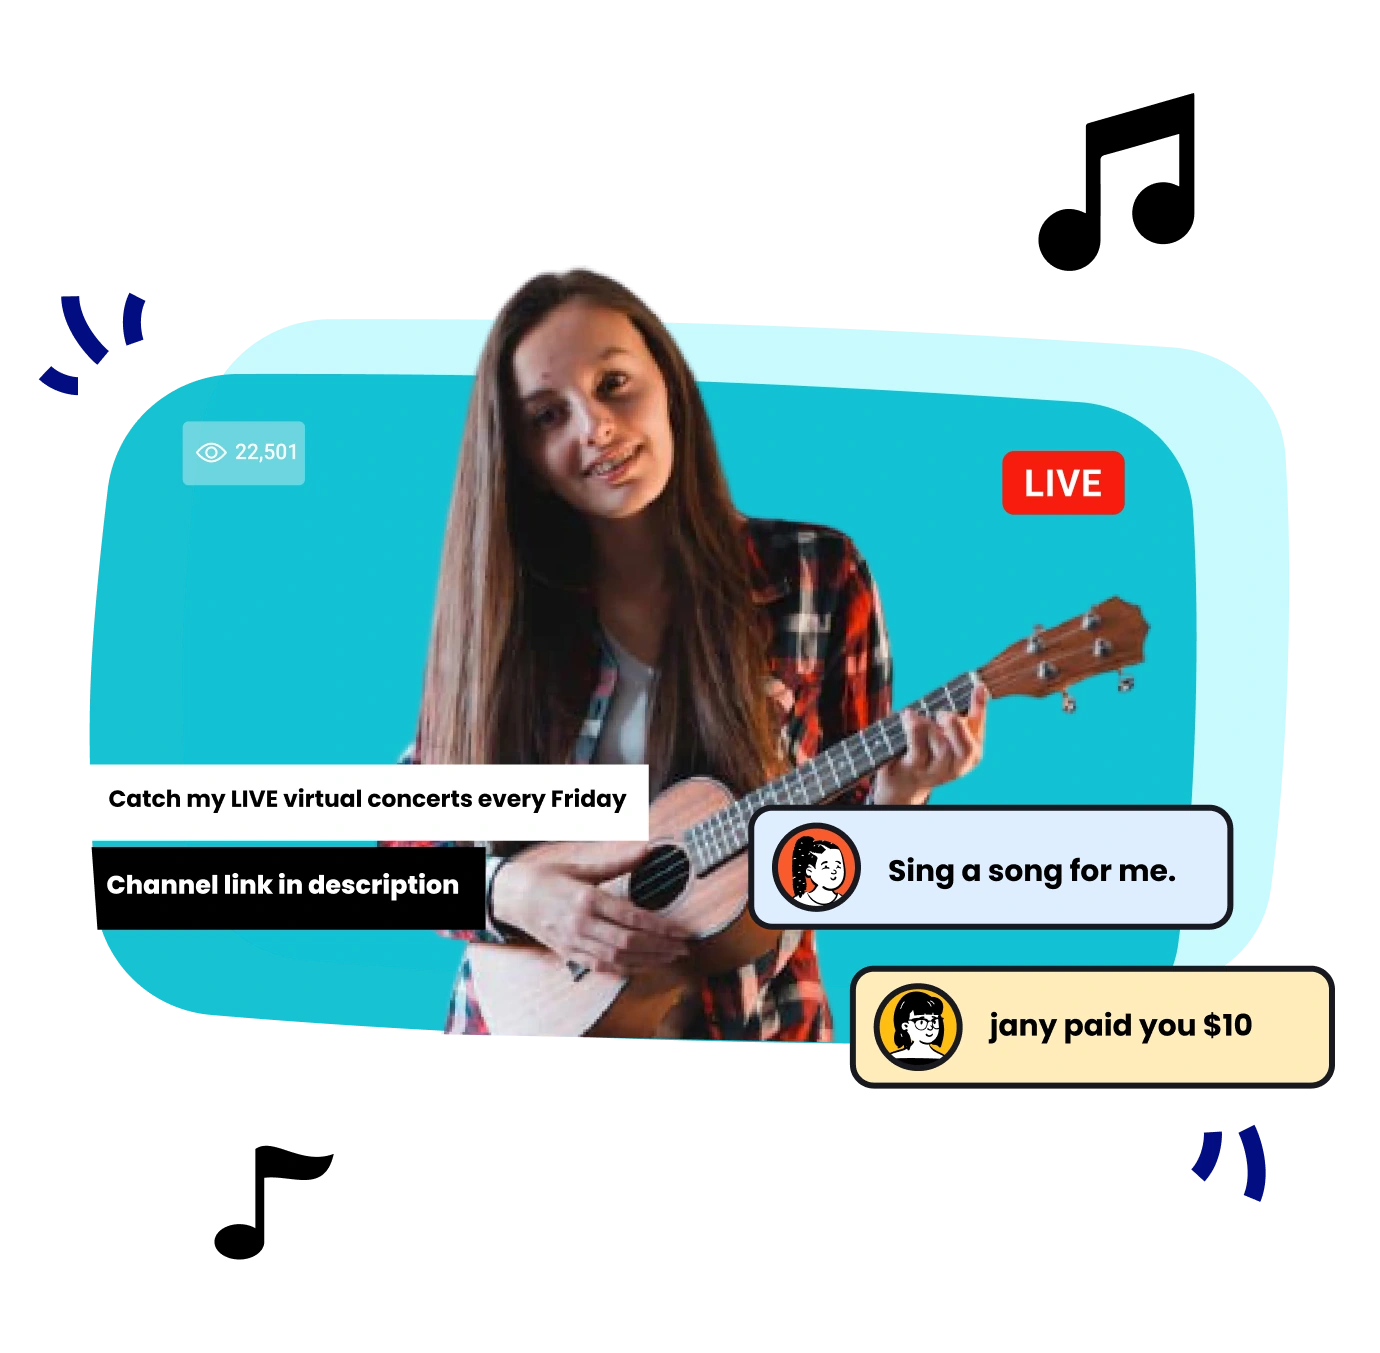 Musicians use case for live streaming